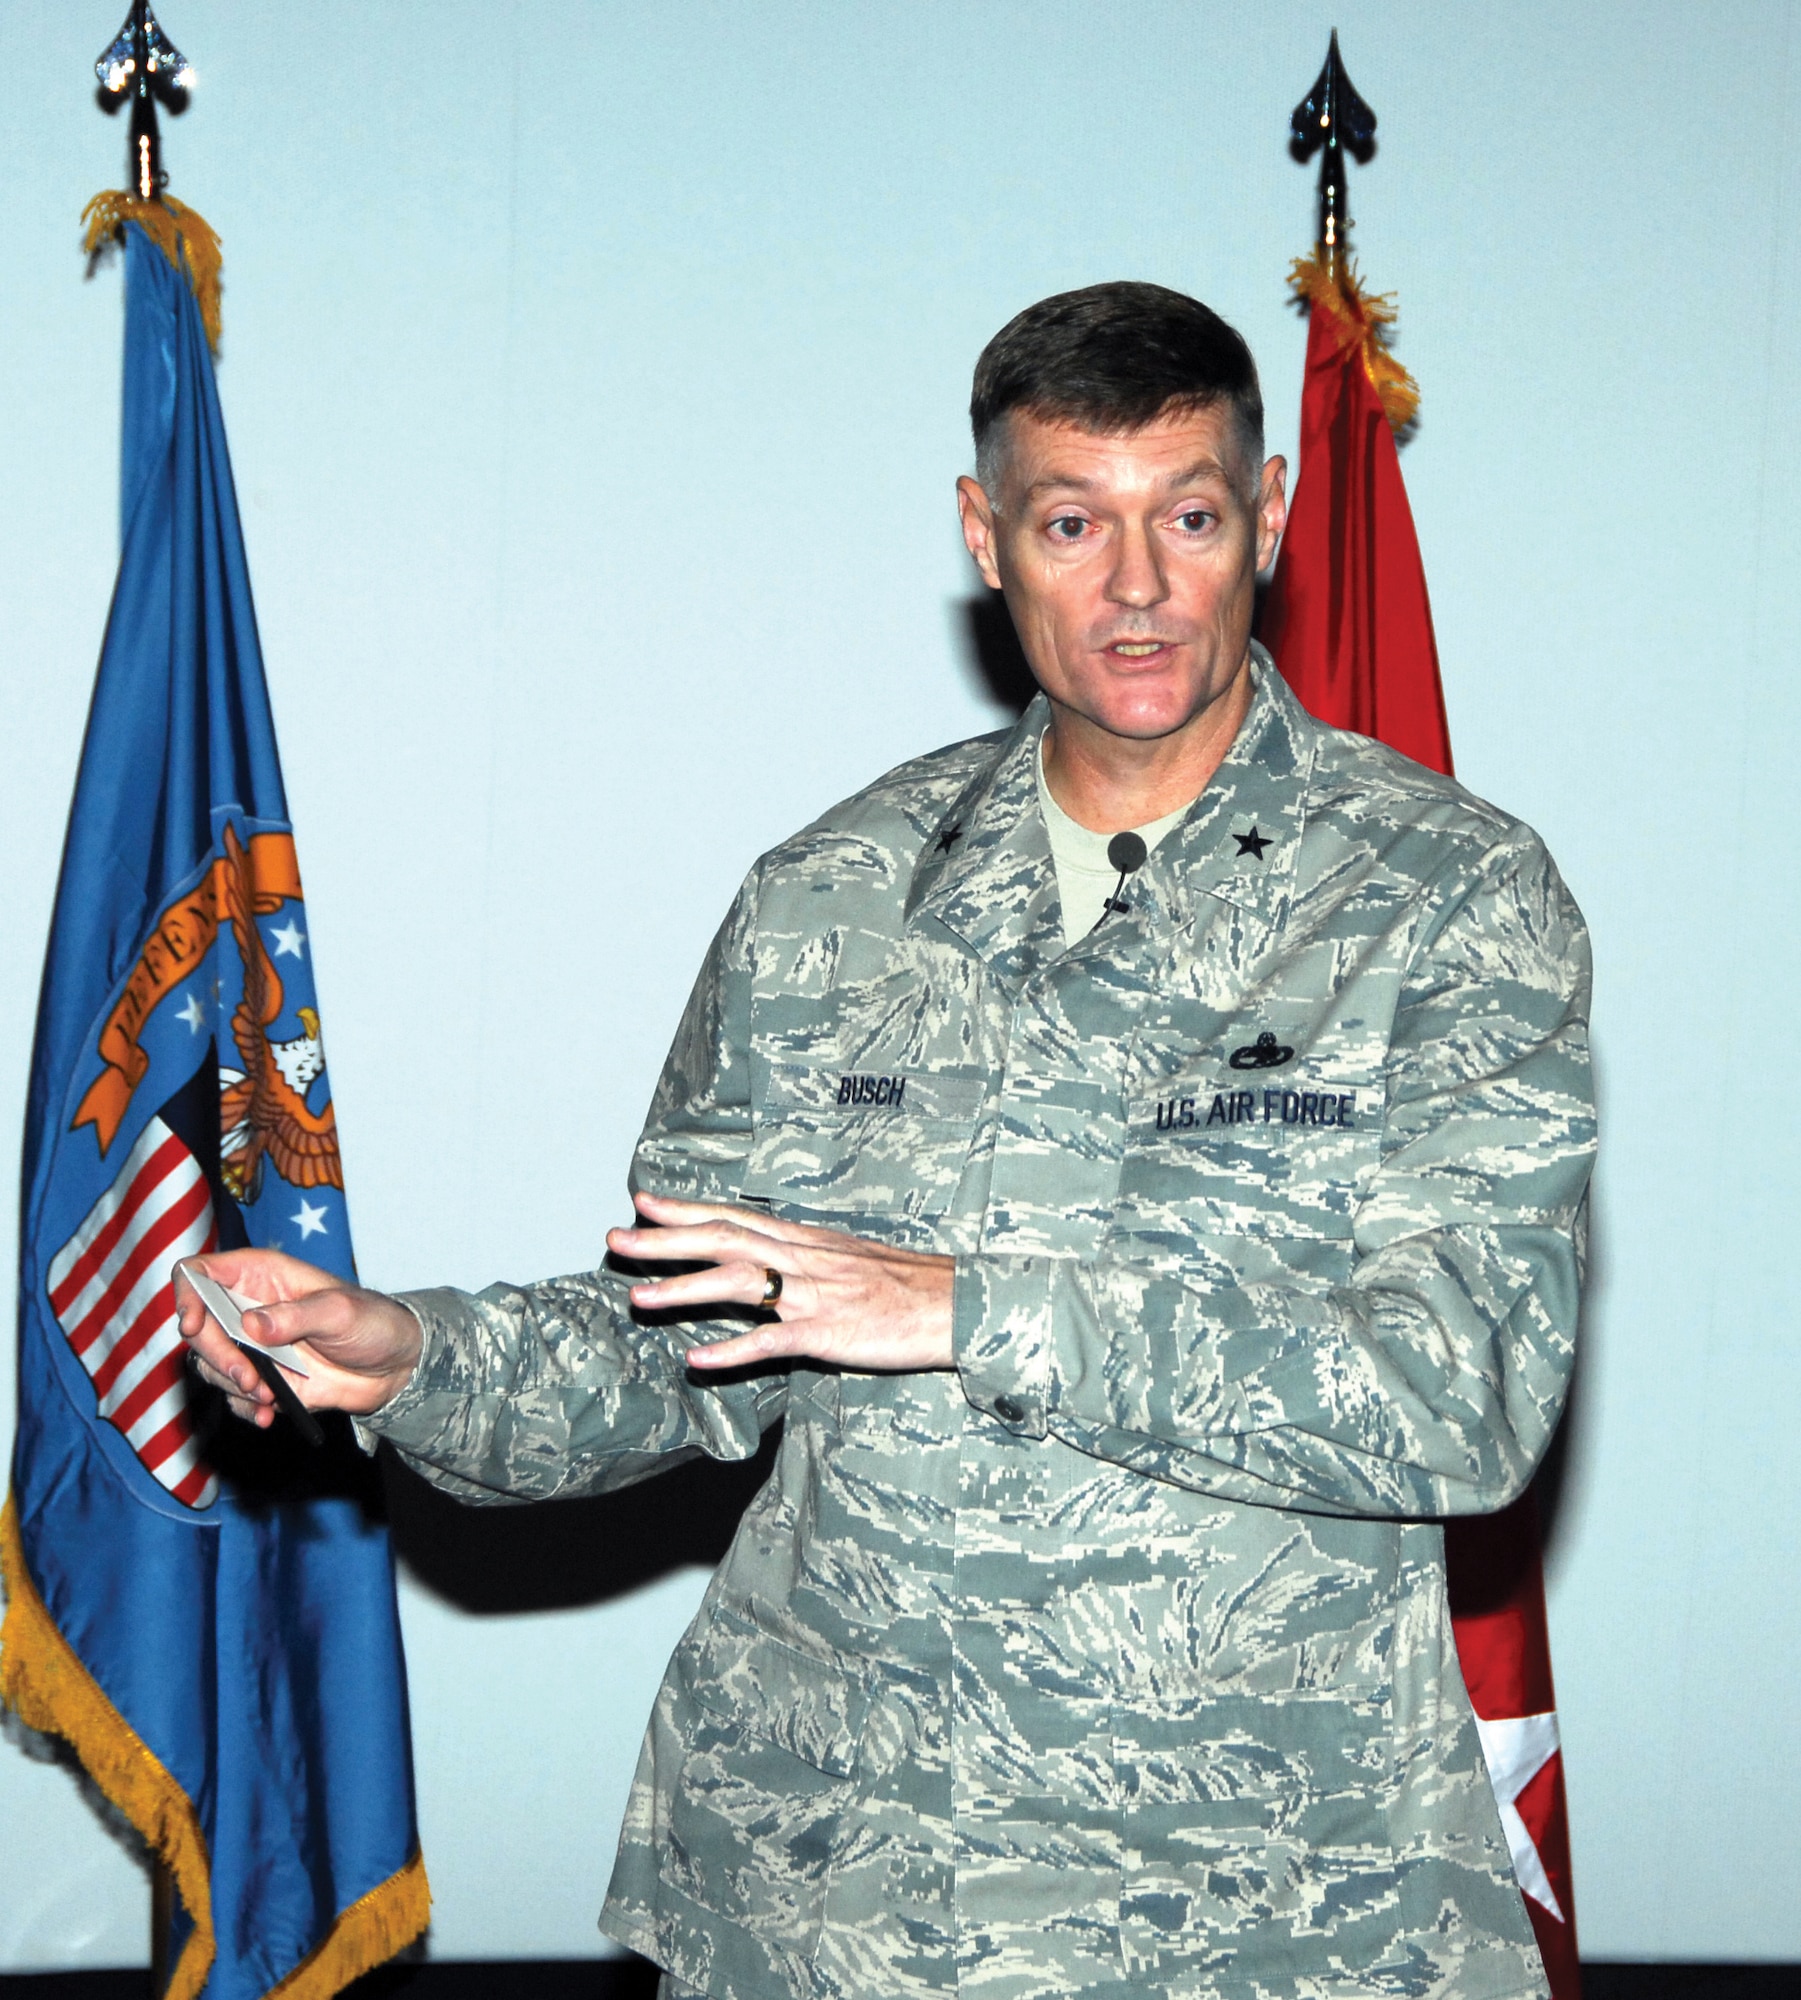 Brig. Gen. Andy Busch, commander of Defense Suply Center, Richmond, made his fifth visit to Robins to help make the transition of base employees to the Defense Logistics Agency a seamless one. U. S. Air Force photo by Claude Lazzara